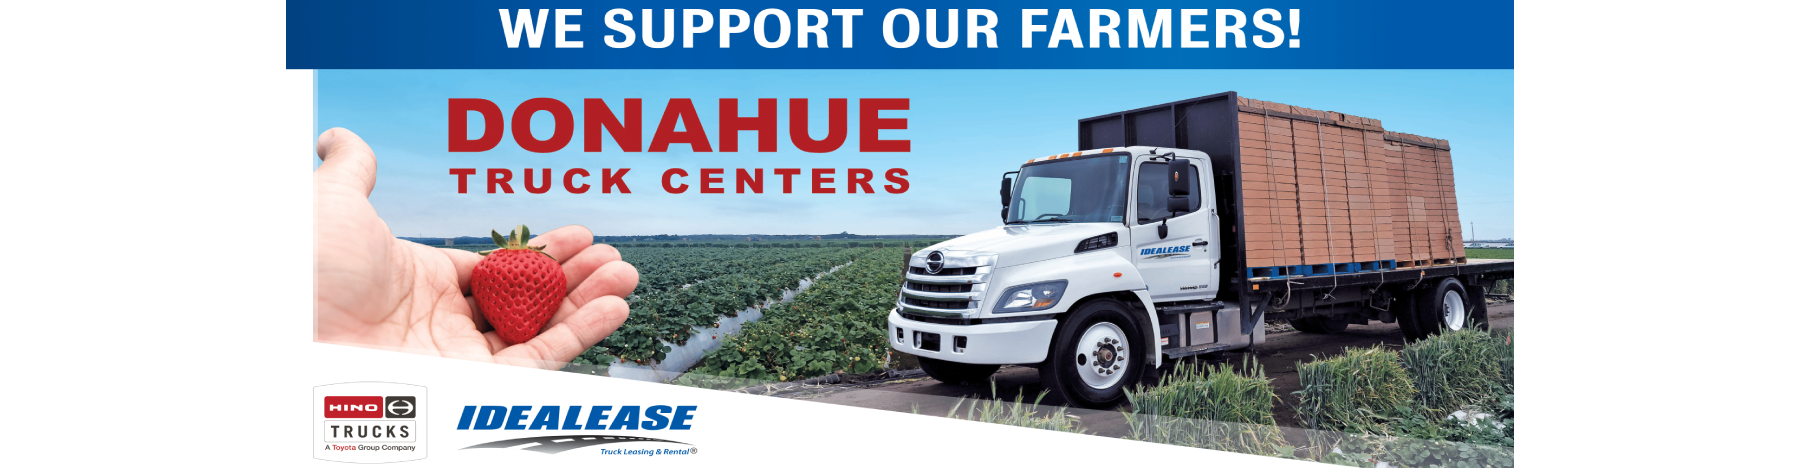 We support our farmers!